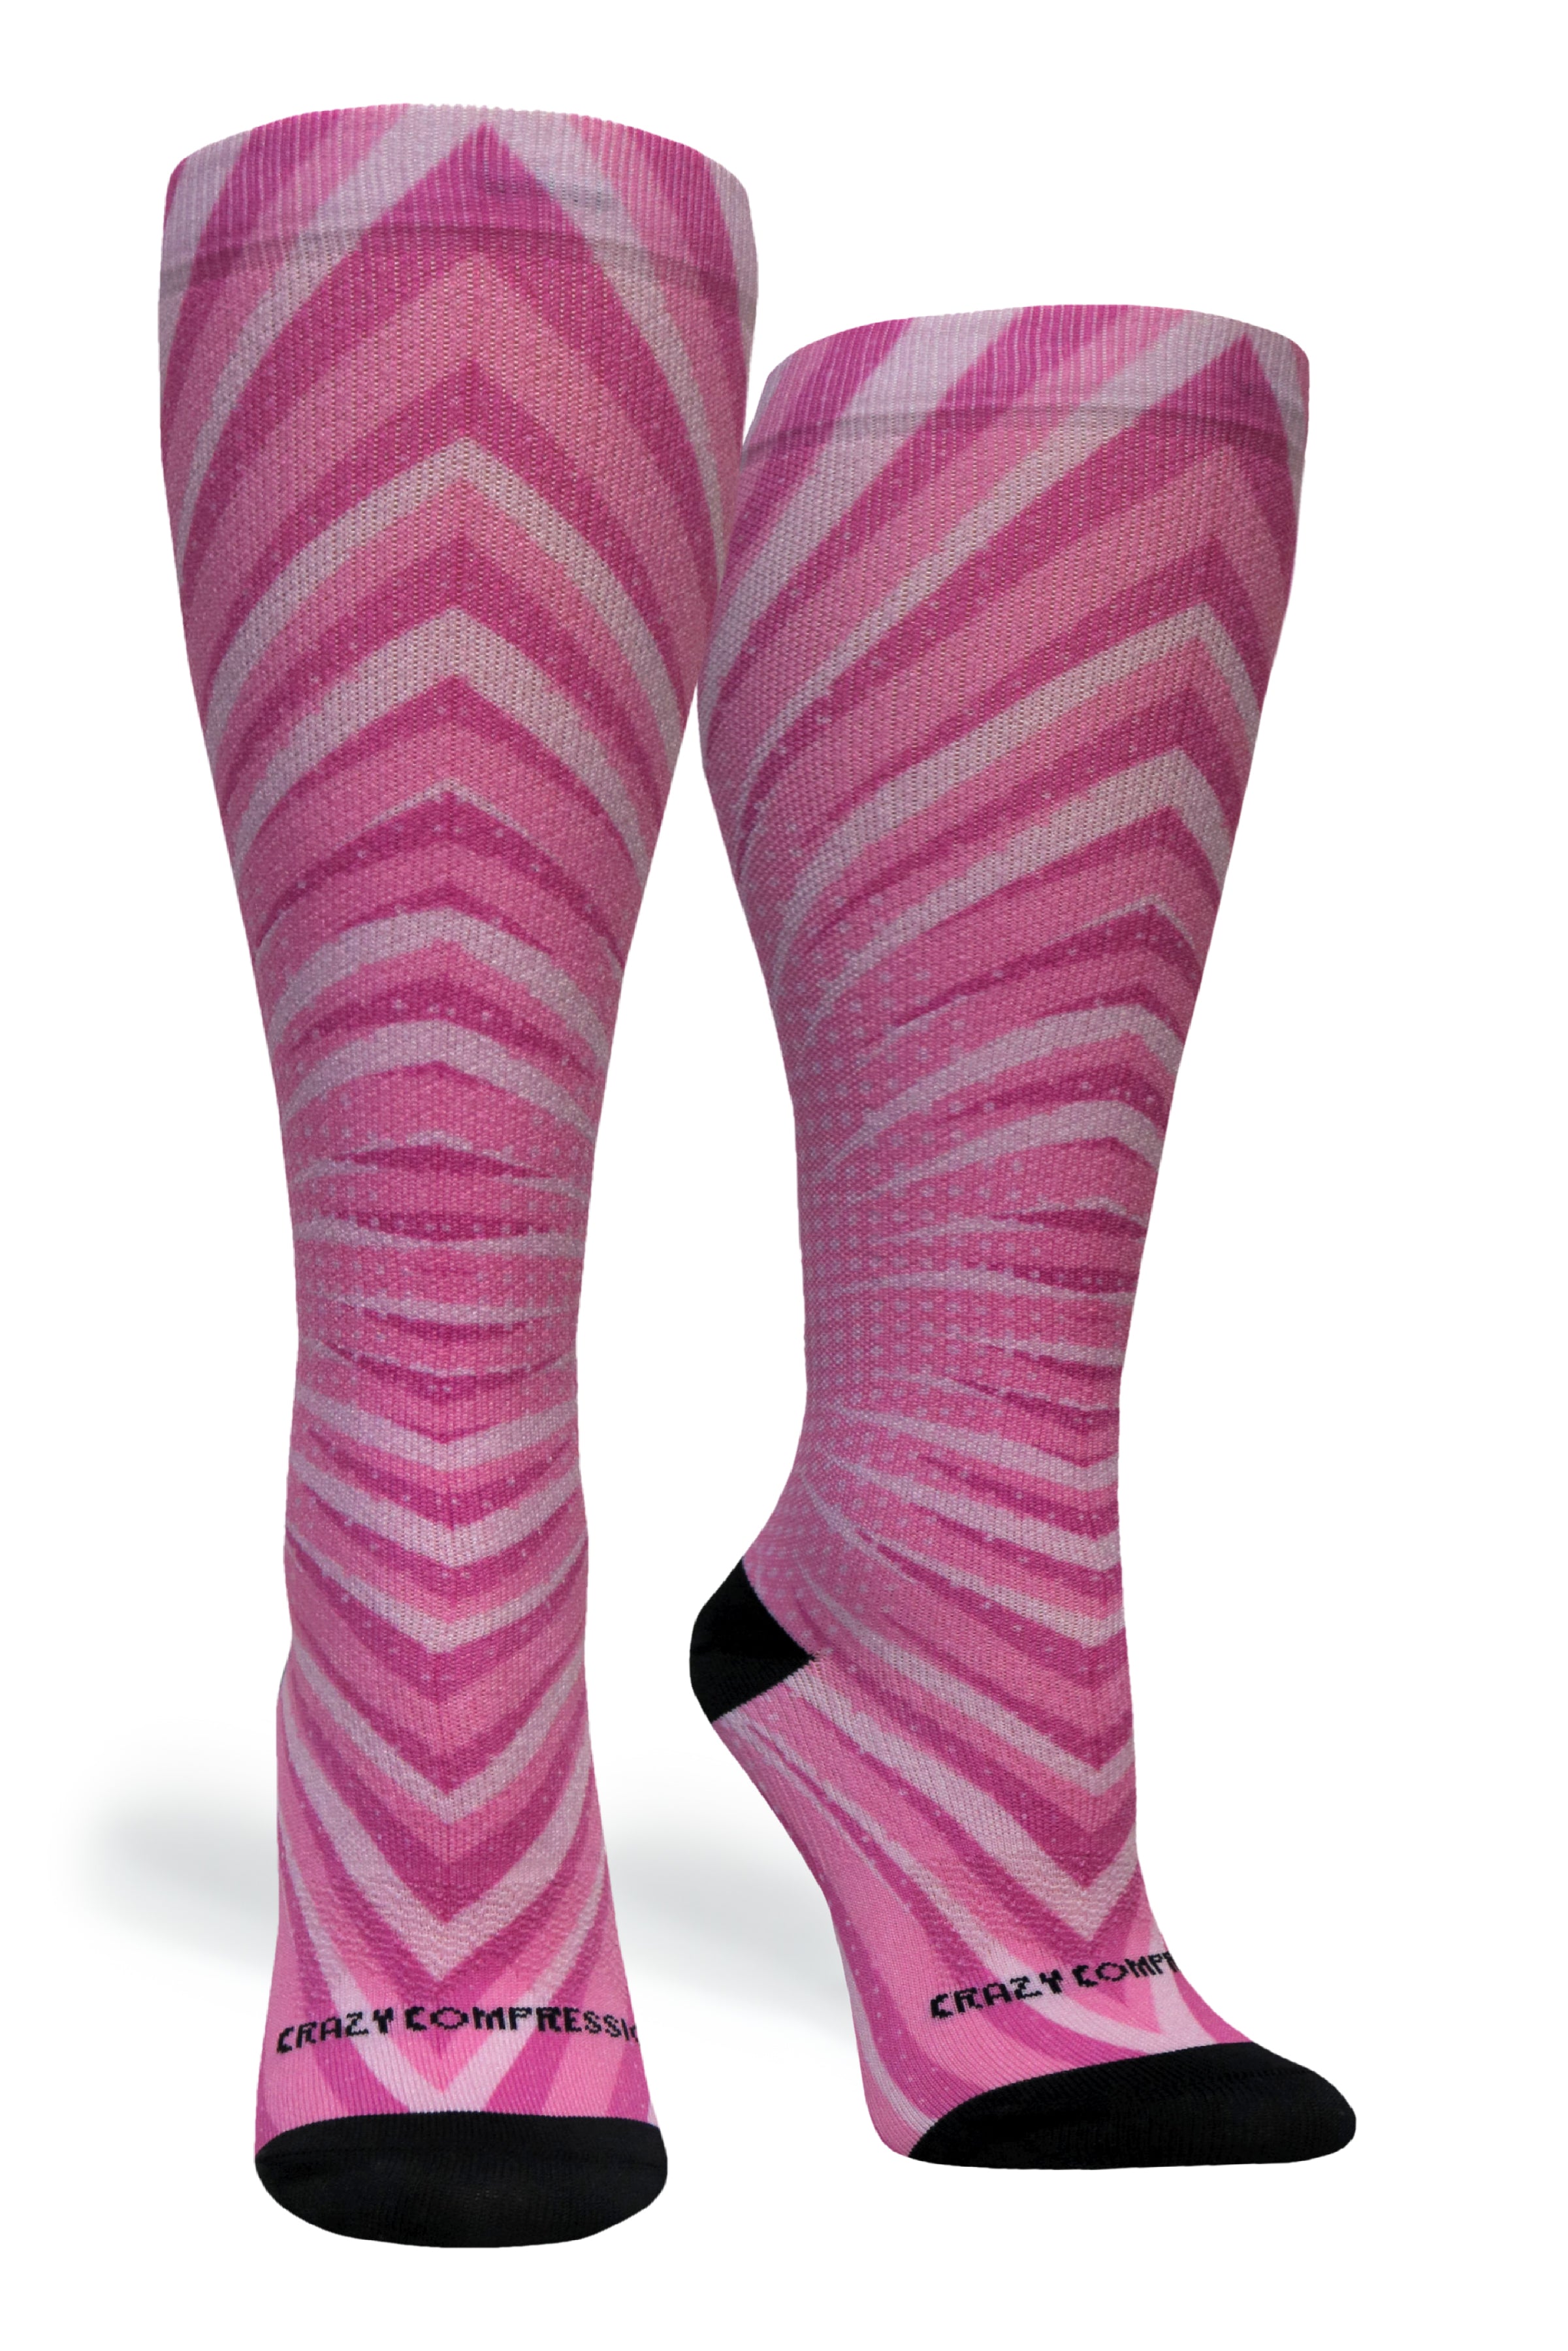 360 Never Quit Pink (EXTRA WIDE CALF)